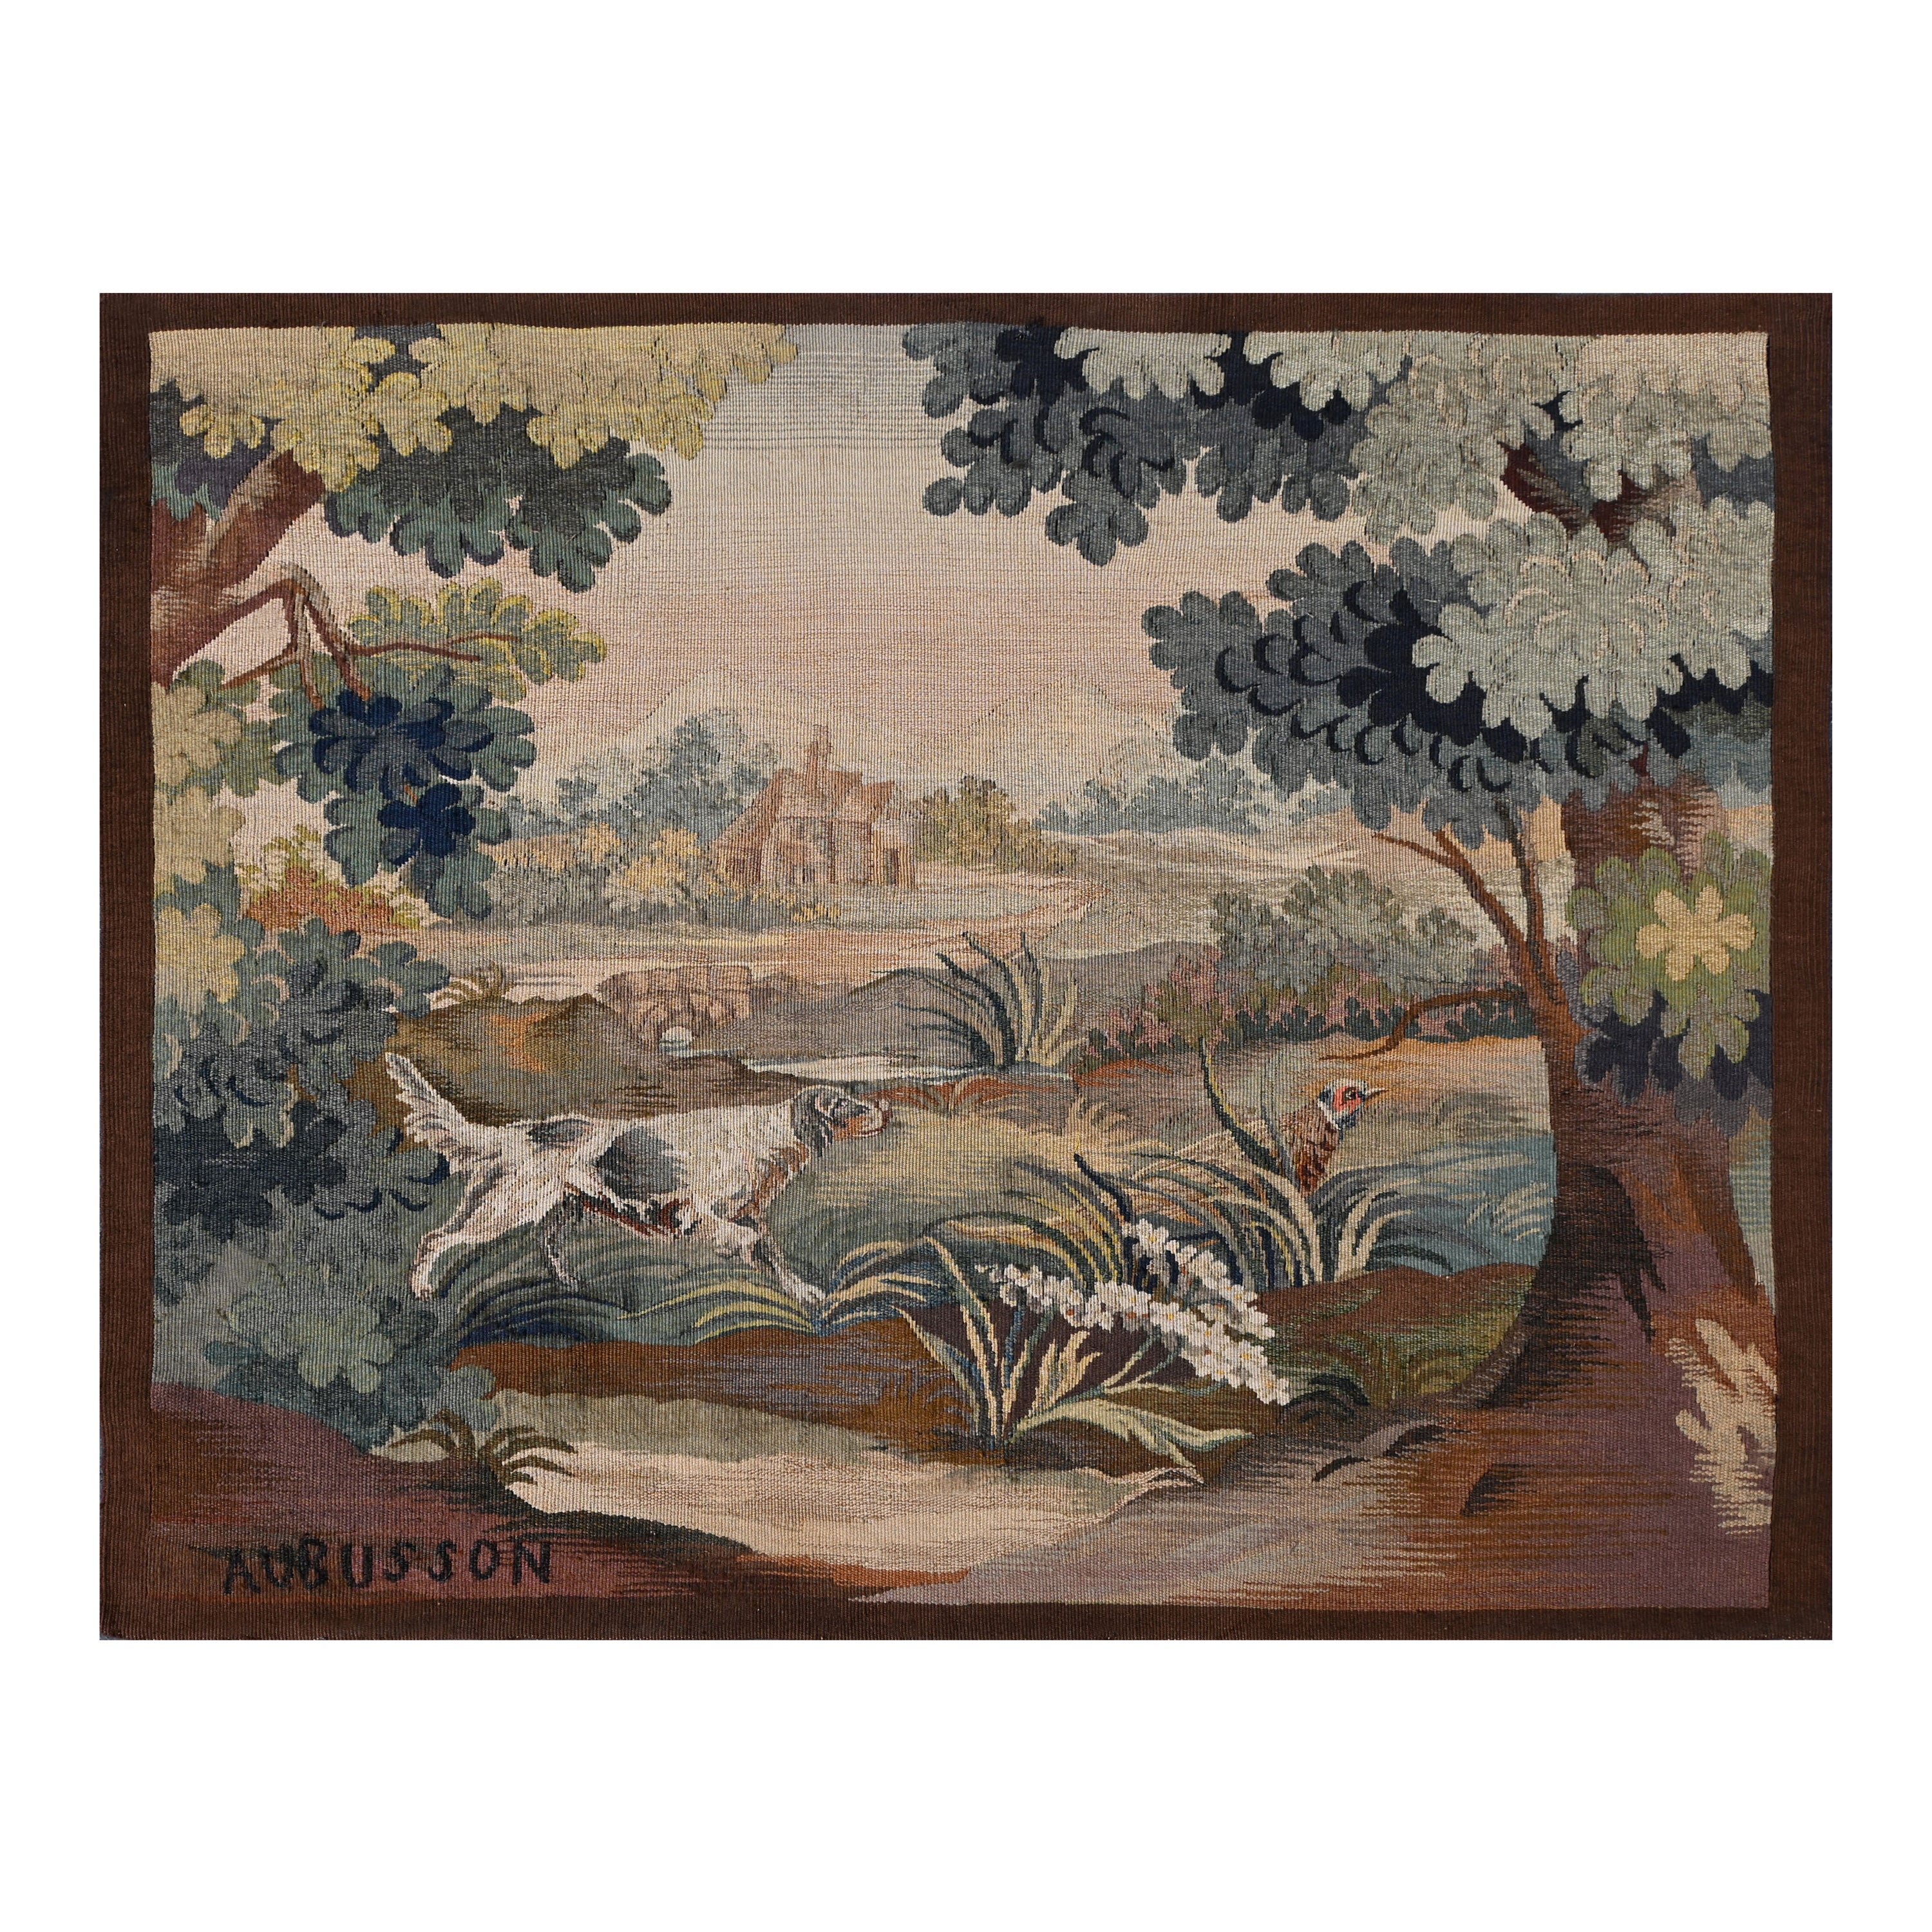 Aubusson Wandteppich - The Dog And Pheasant Nach Jean-Baptiste Oudry - N° 1398 im Angebot